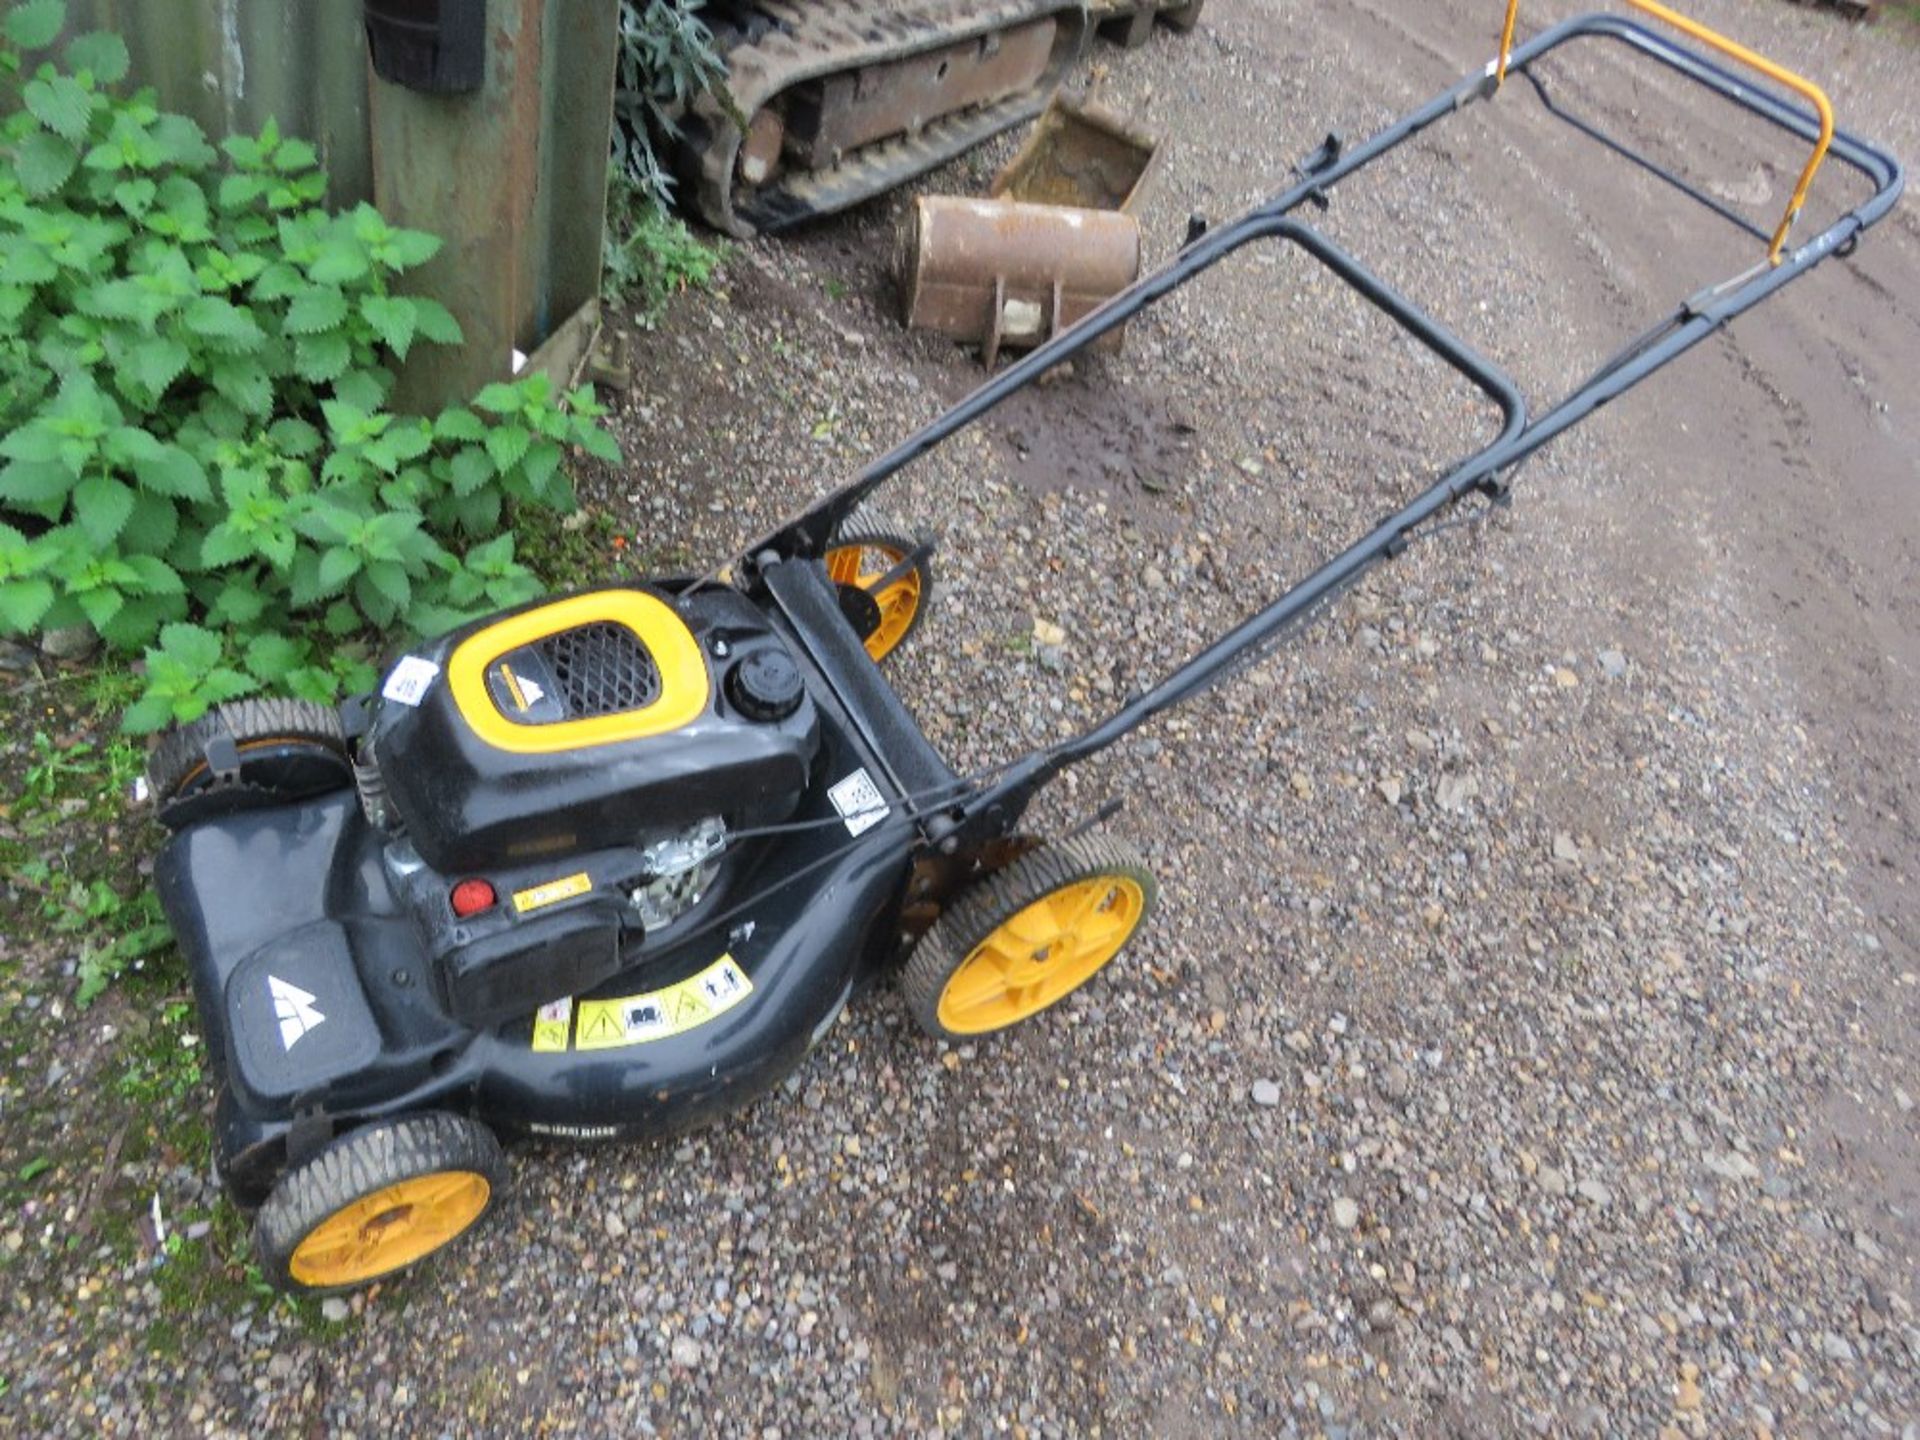 McCULLOCH PETROL ENGINED ROTARY LAWNMOWER. NO COLLECTOR. THIS LOT IS SOLD UNDER THE AUCTIONEERS